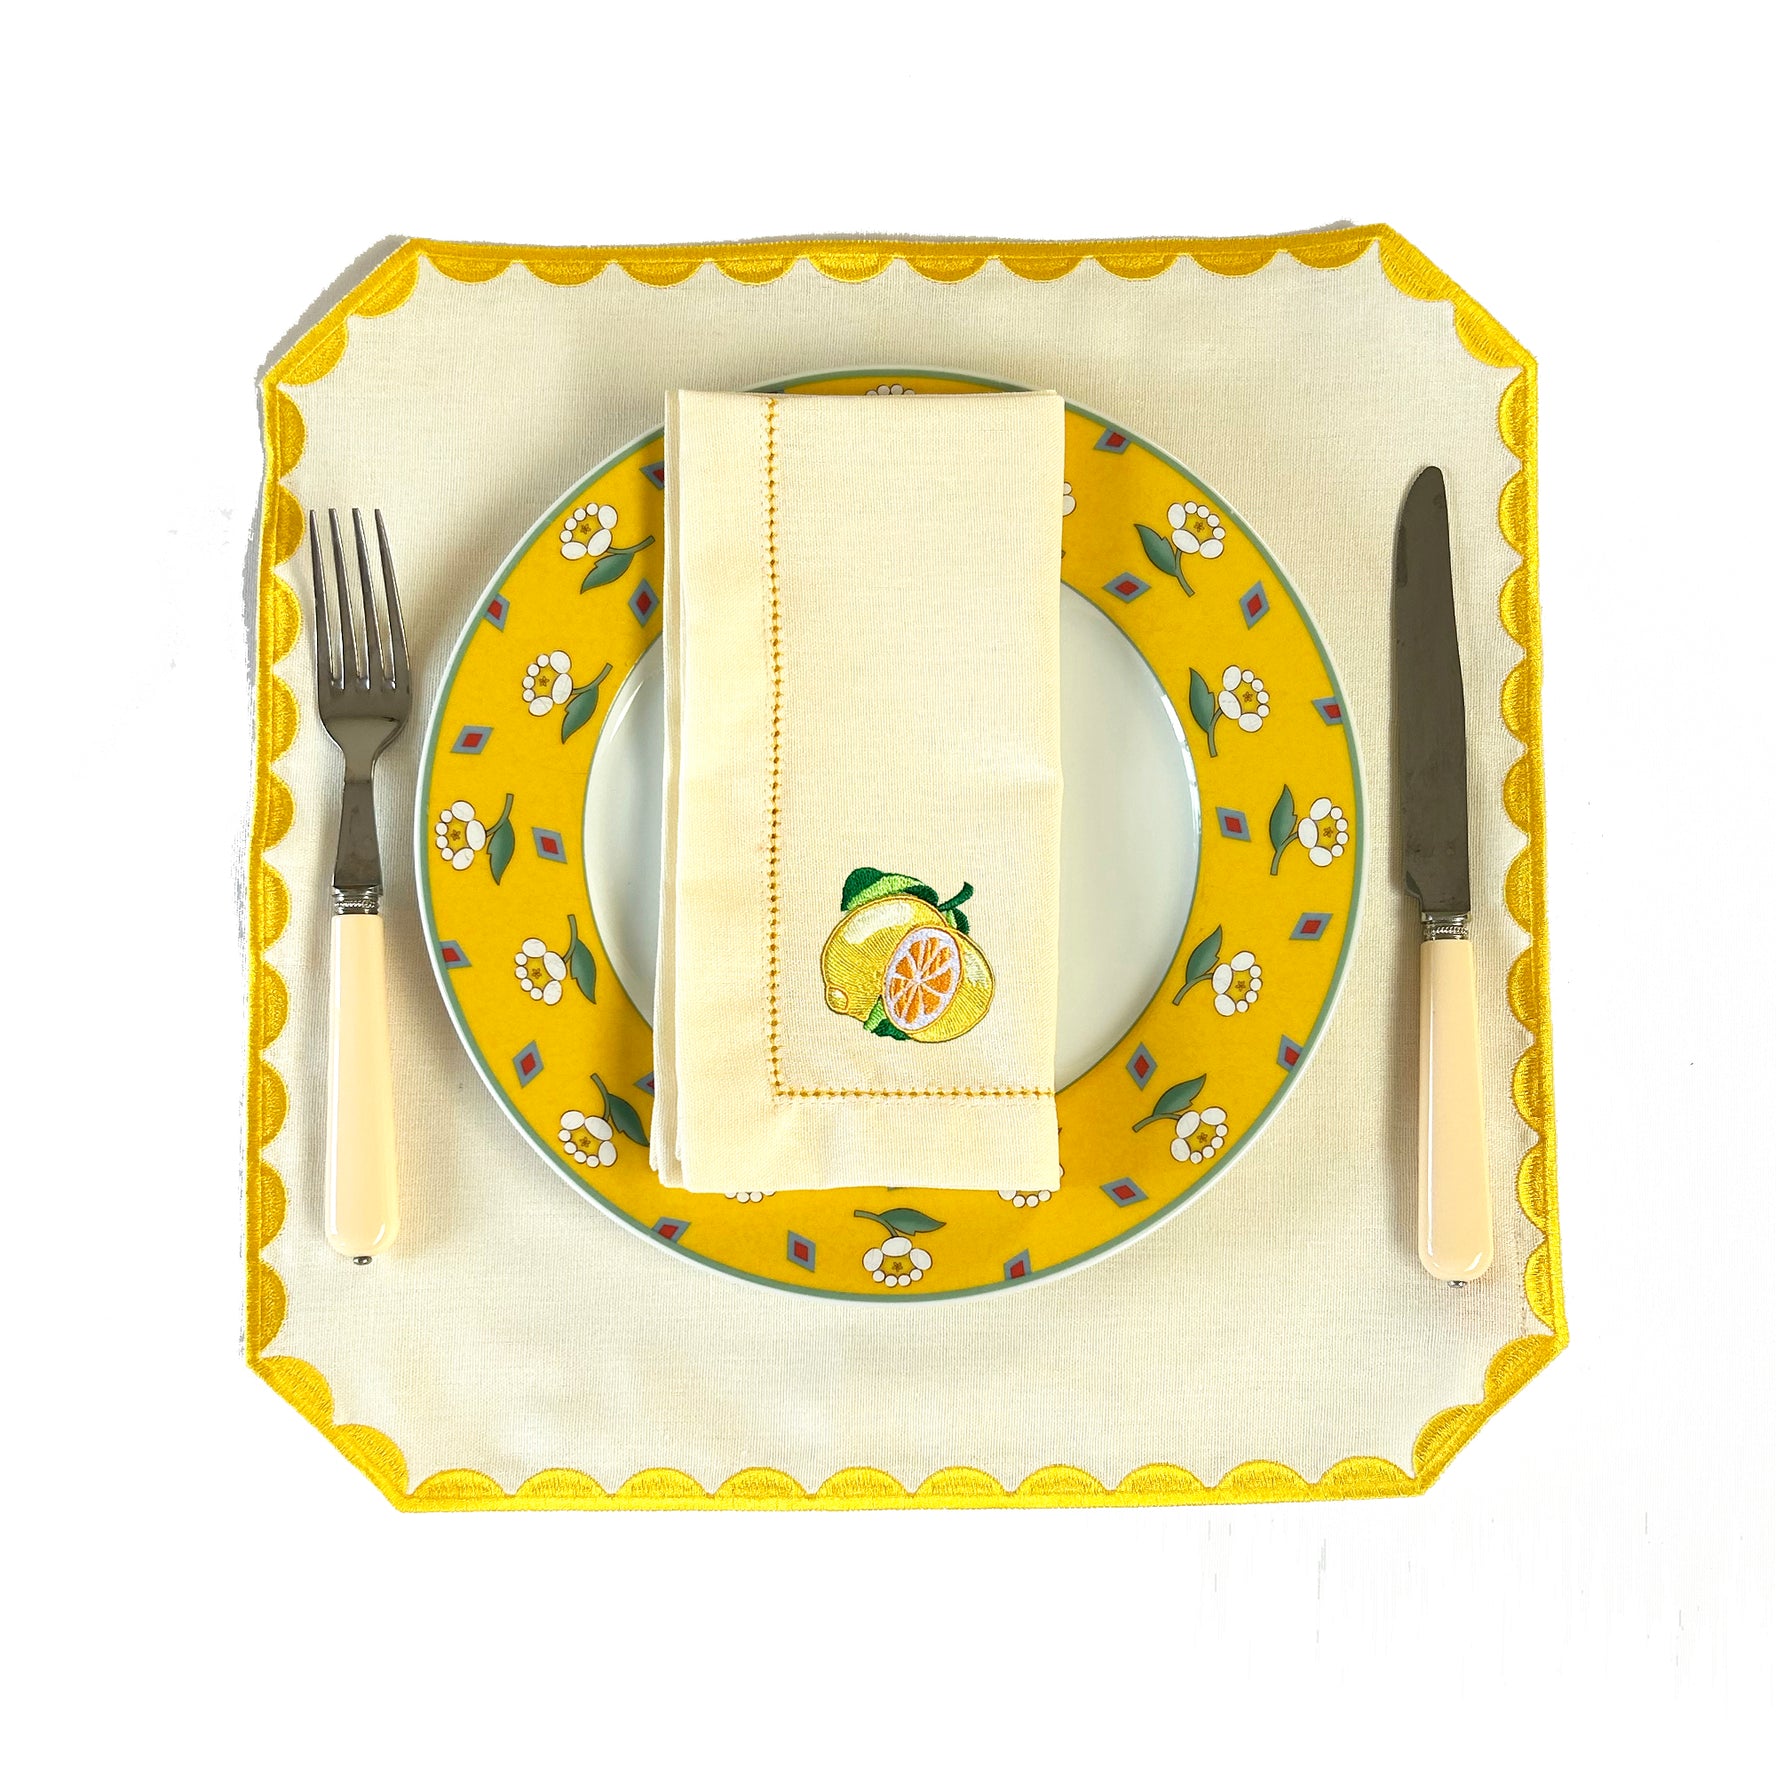 Embroidered Lemon Placemats | Set of 4